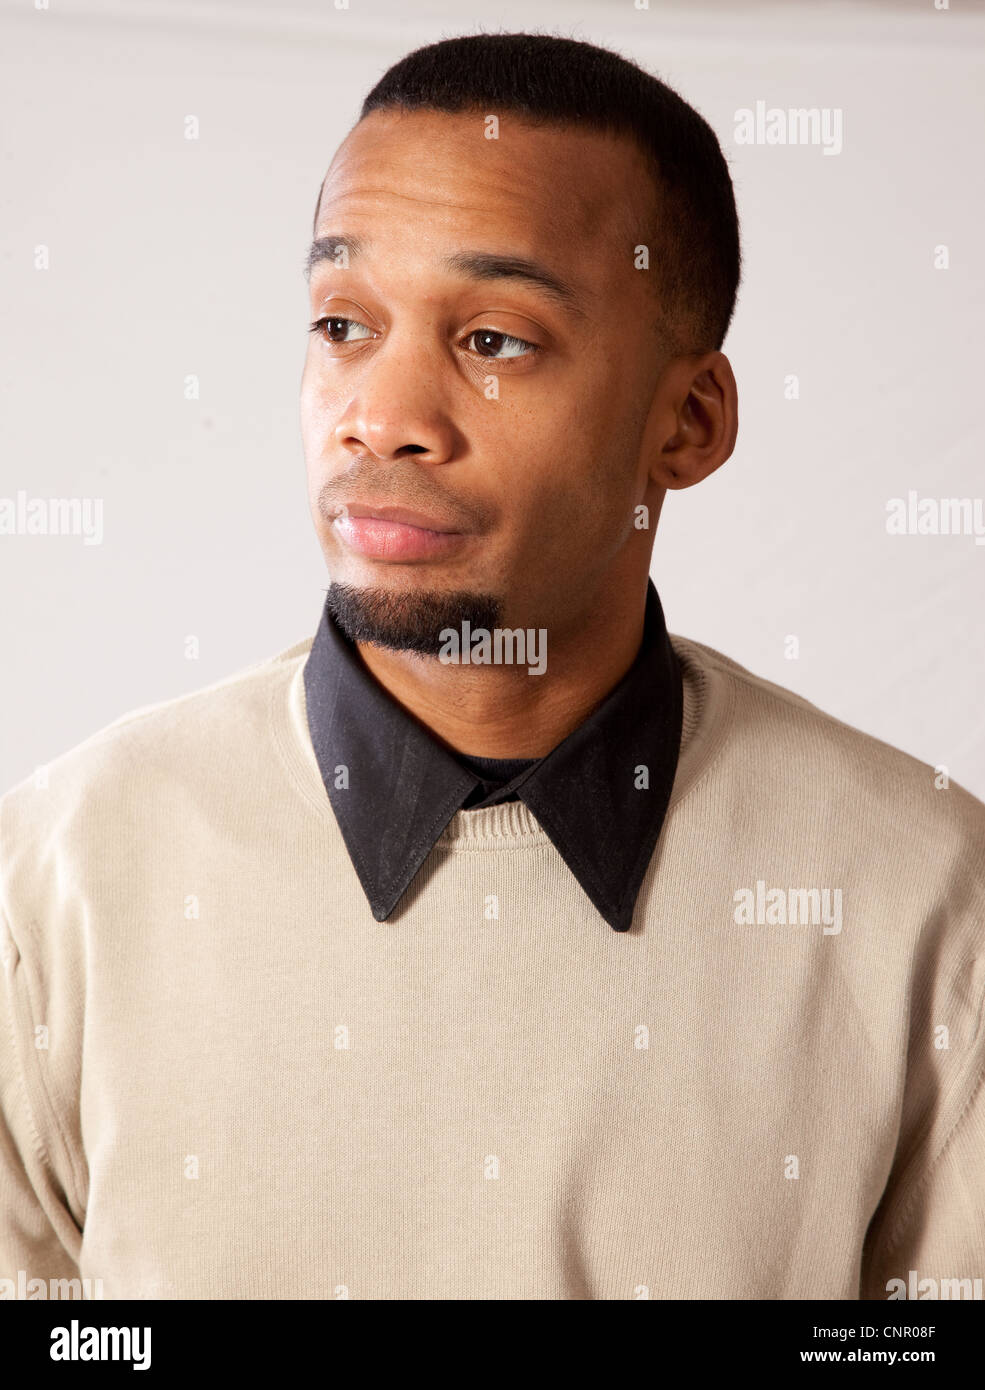 Thoughtful young black man, wearing sweater and looking all pensive and sad Stock Photo